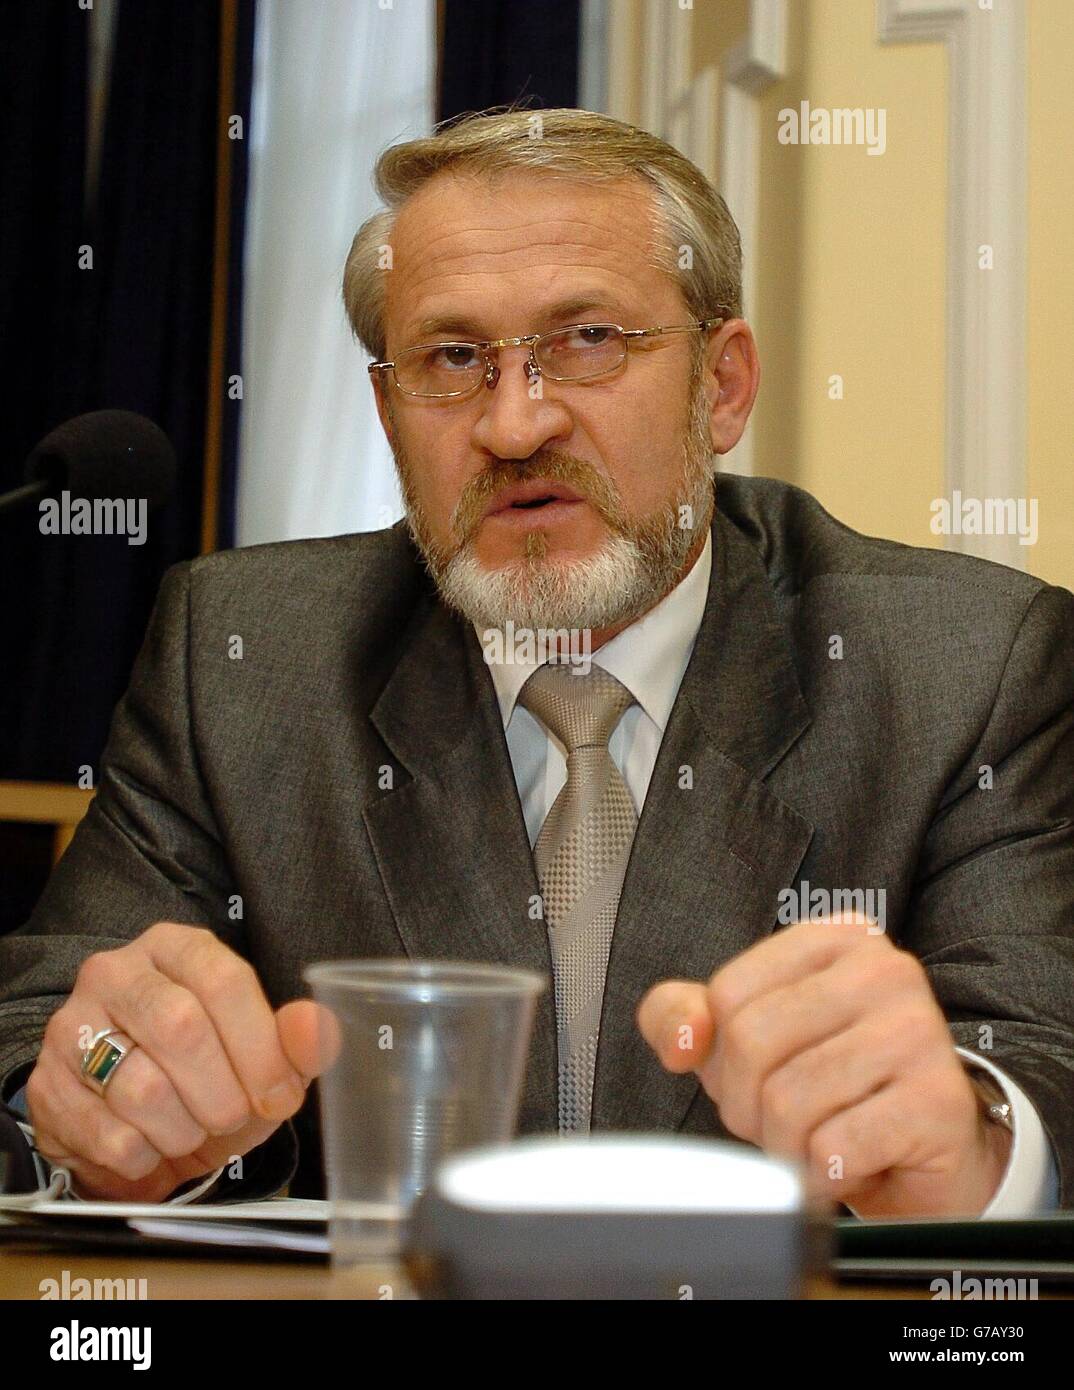 Chechen envoy Akhmed Zakayev speaking during a press conference in Westminster, London. Zakayev said he fears there will be further massacres in his homeland if Russian president Vladimir Putin does not hold peace talks with political parties in the region. Stock Photo